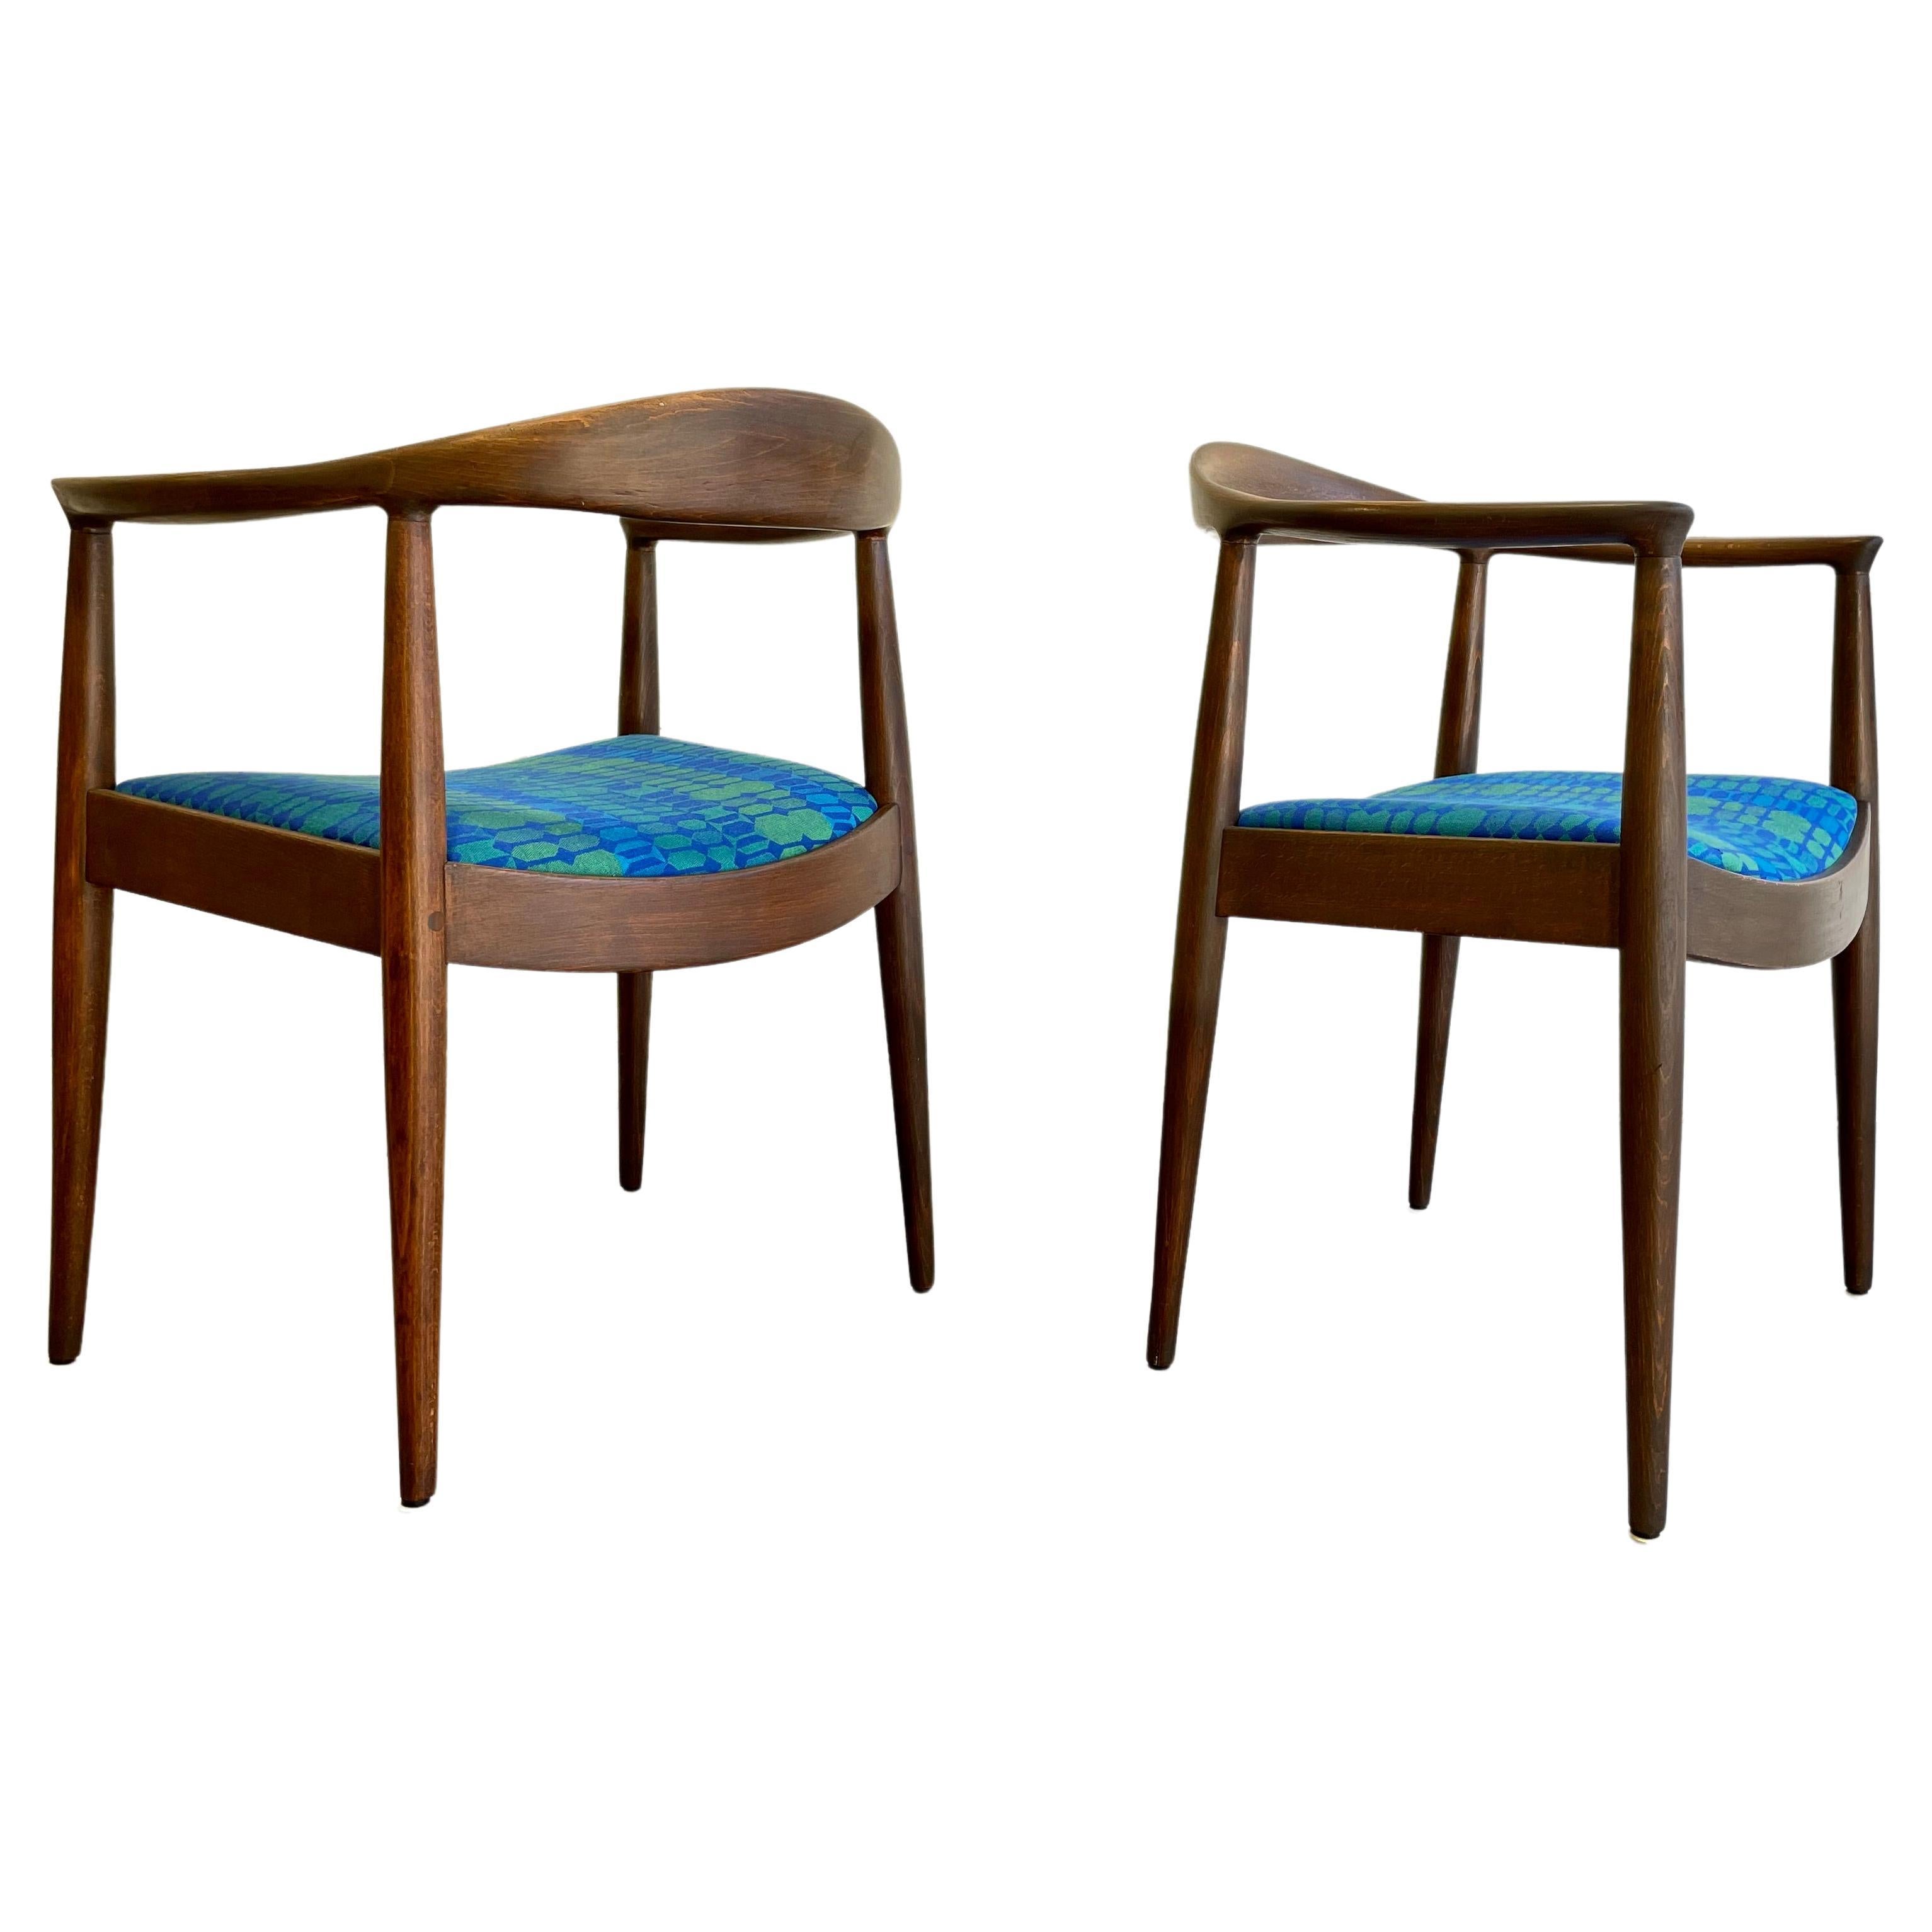 Vintage Mid-Century Modern Lounge Chairs in the style of Hans Wegner. Elegant curvilinear walnut frame is beautifully constructed and the chairs are newly refinished showcasing the gorgeous wood grains. The chairs have been newly reupholstered in an